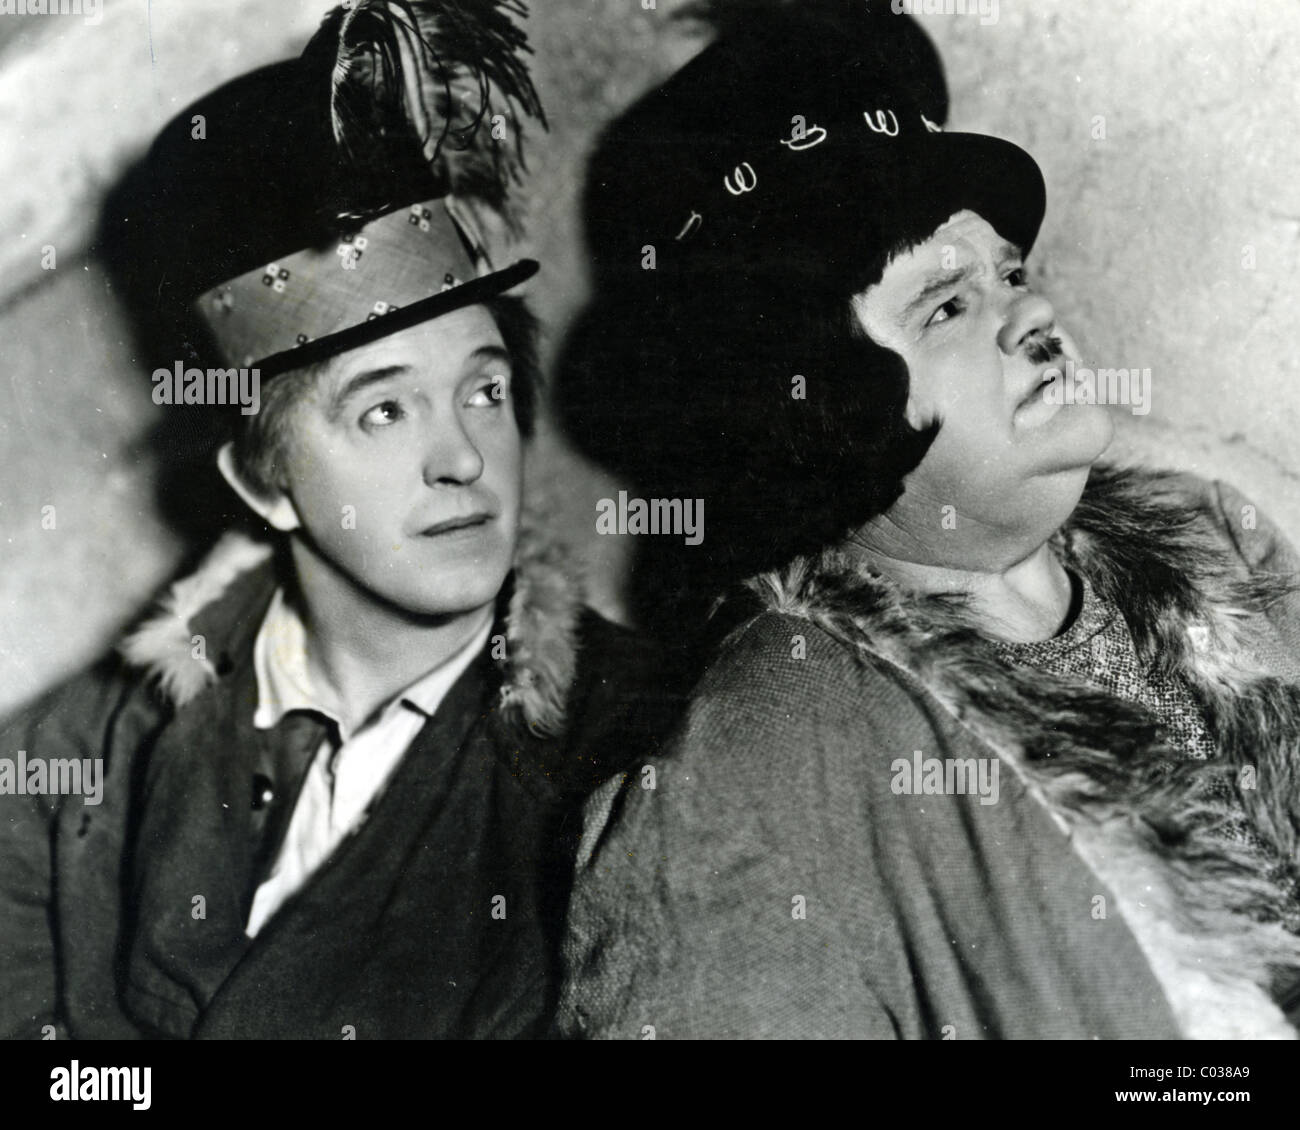 THE BOHEMIAN GIRL 1936 Hal Roach/MGM film with Stan Laurel at left and ...